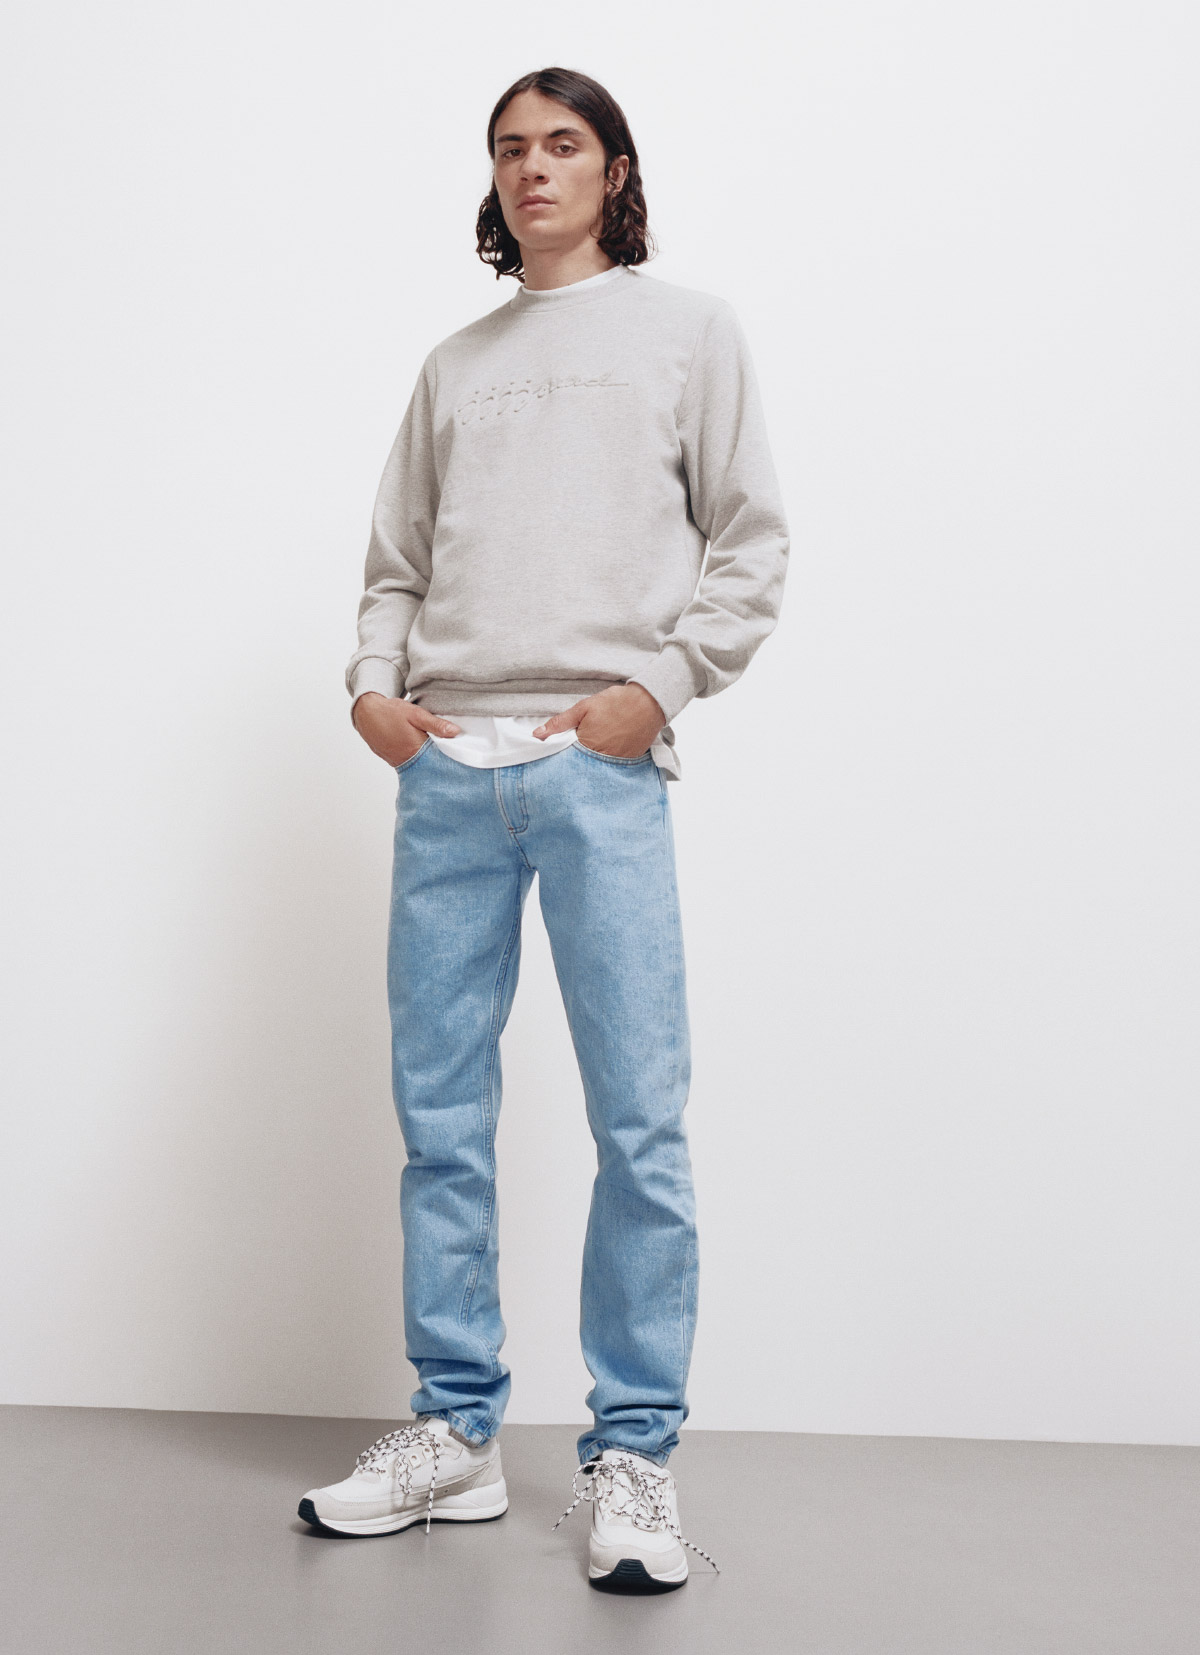 A.P.C.’s Jean Touitou Is the Original Master of Collaborations